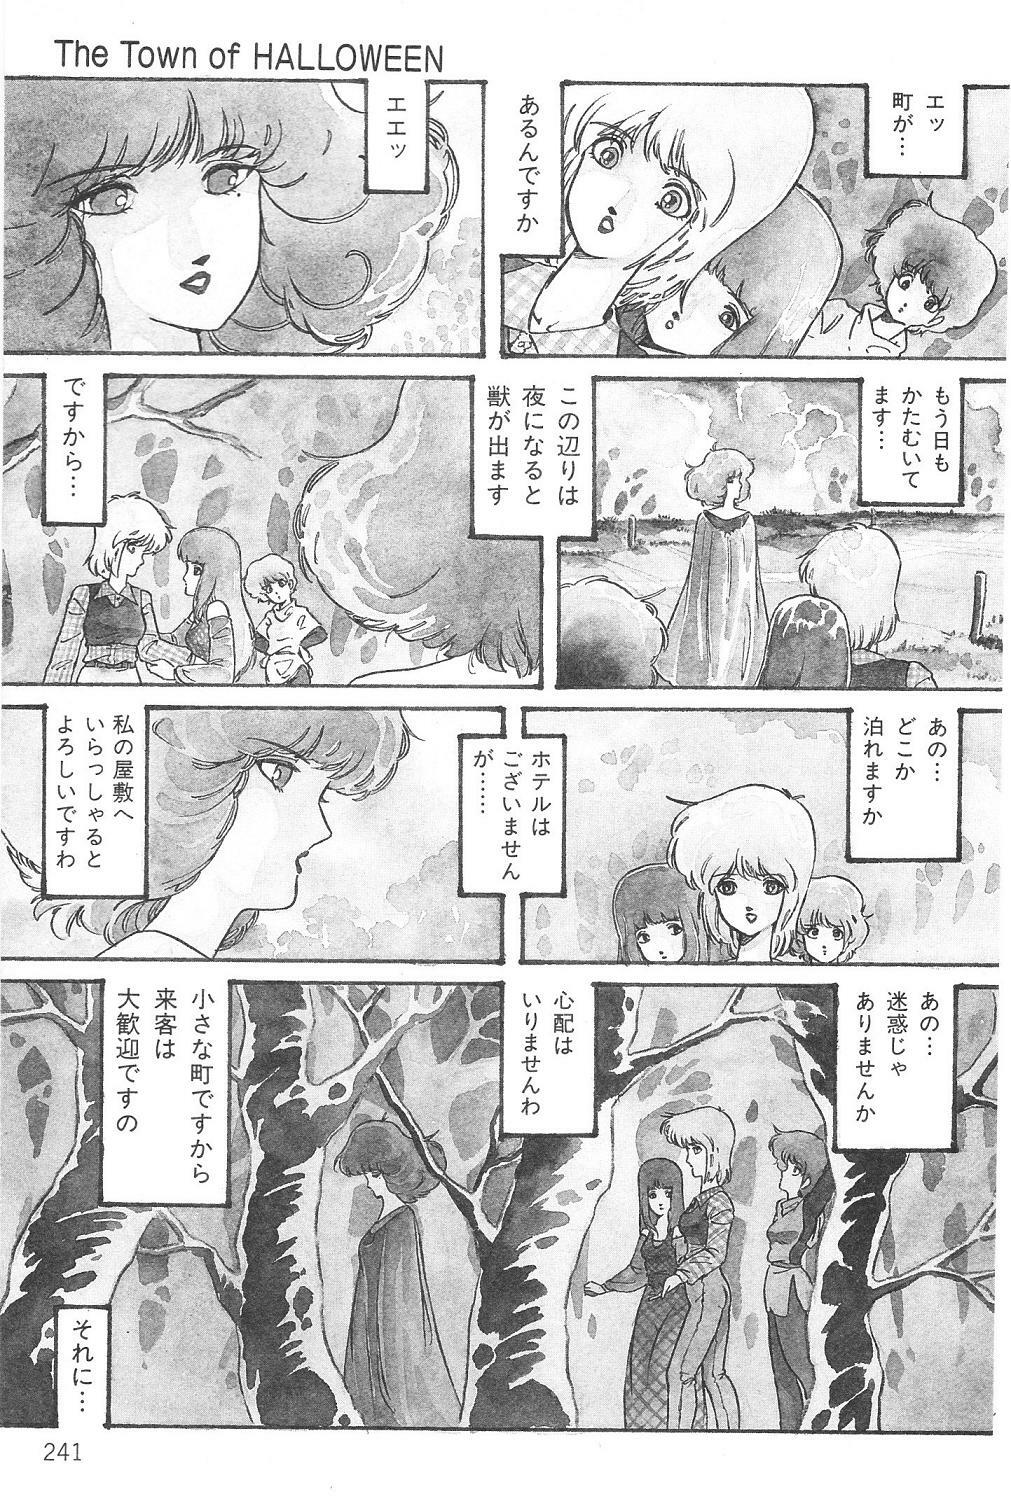 Aran-Rei THE TOWN OF HELLOWEEN page 7 full